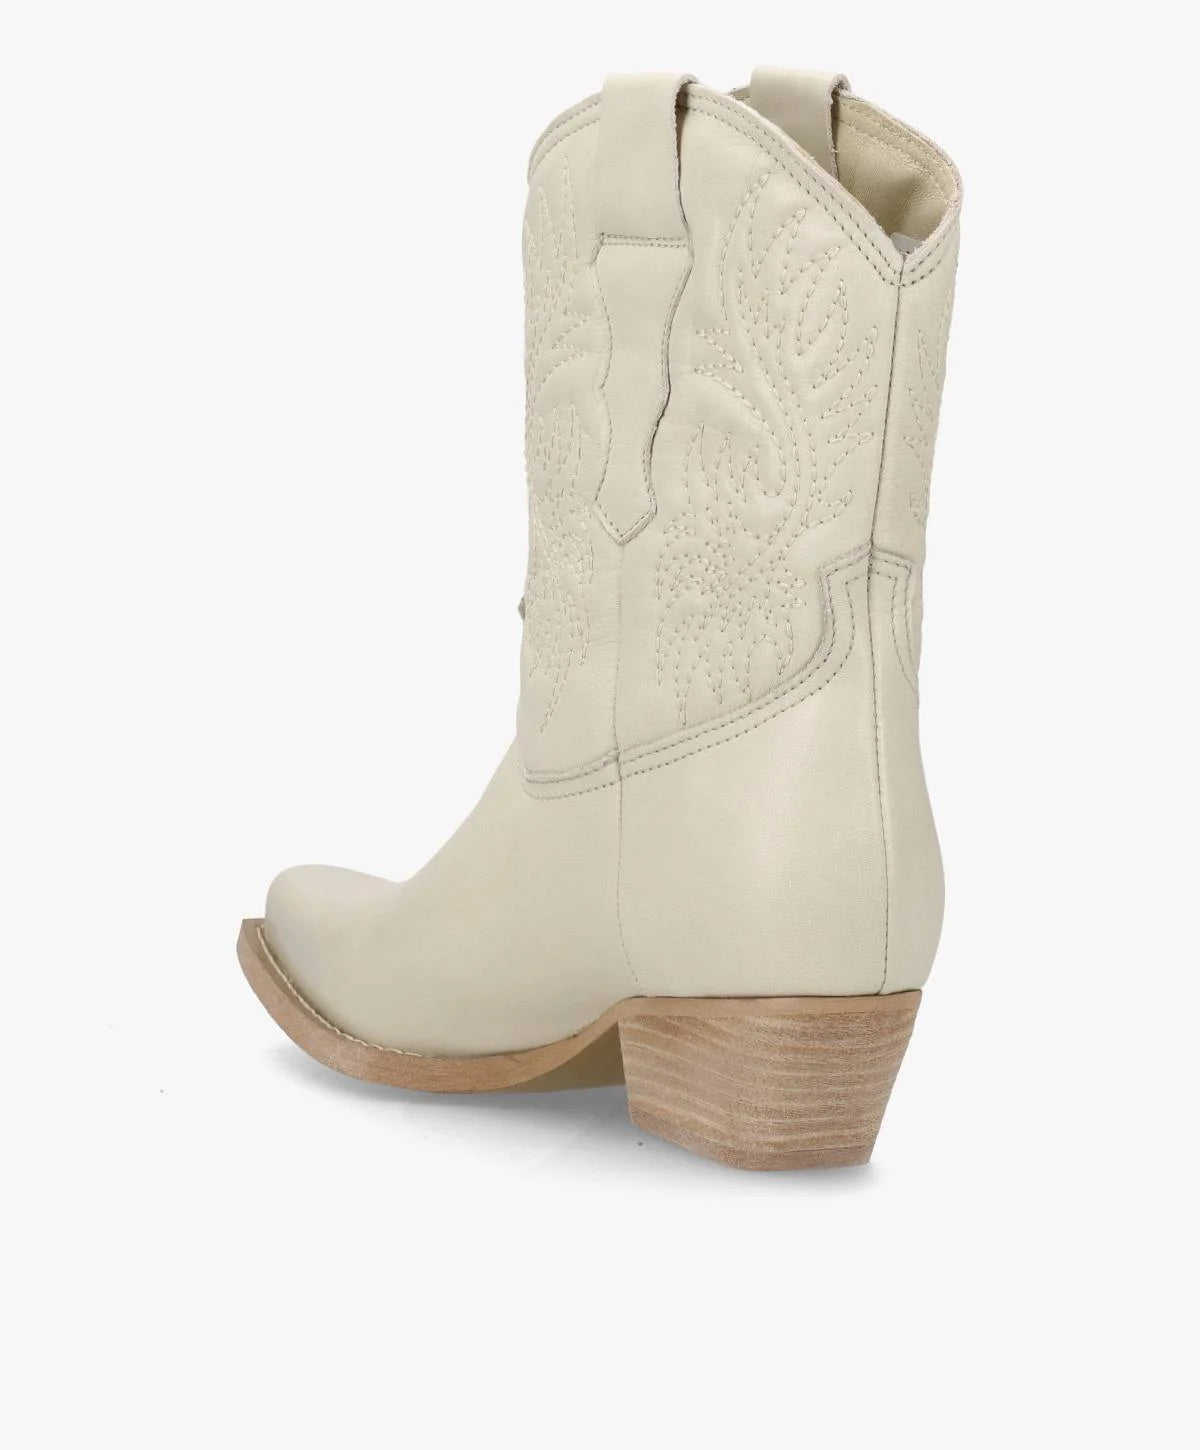 Nellie-Western Low Boots